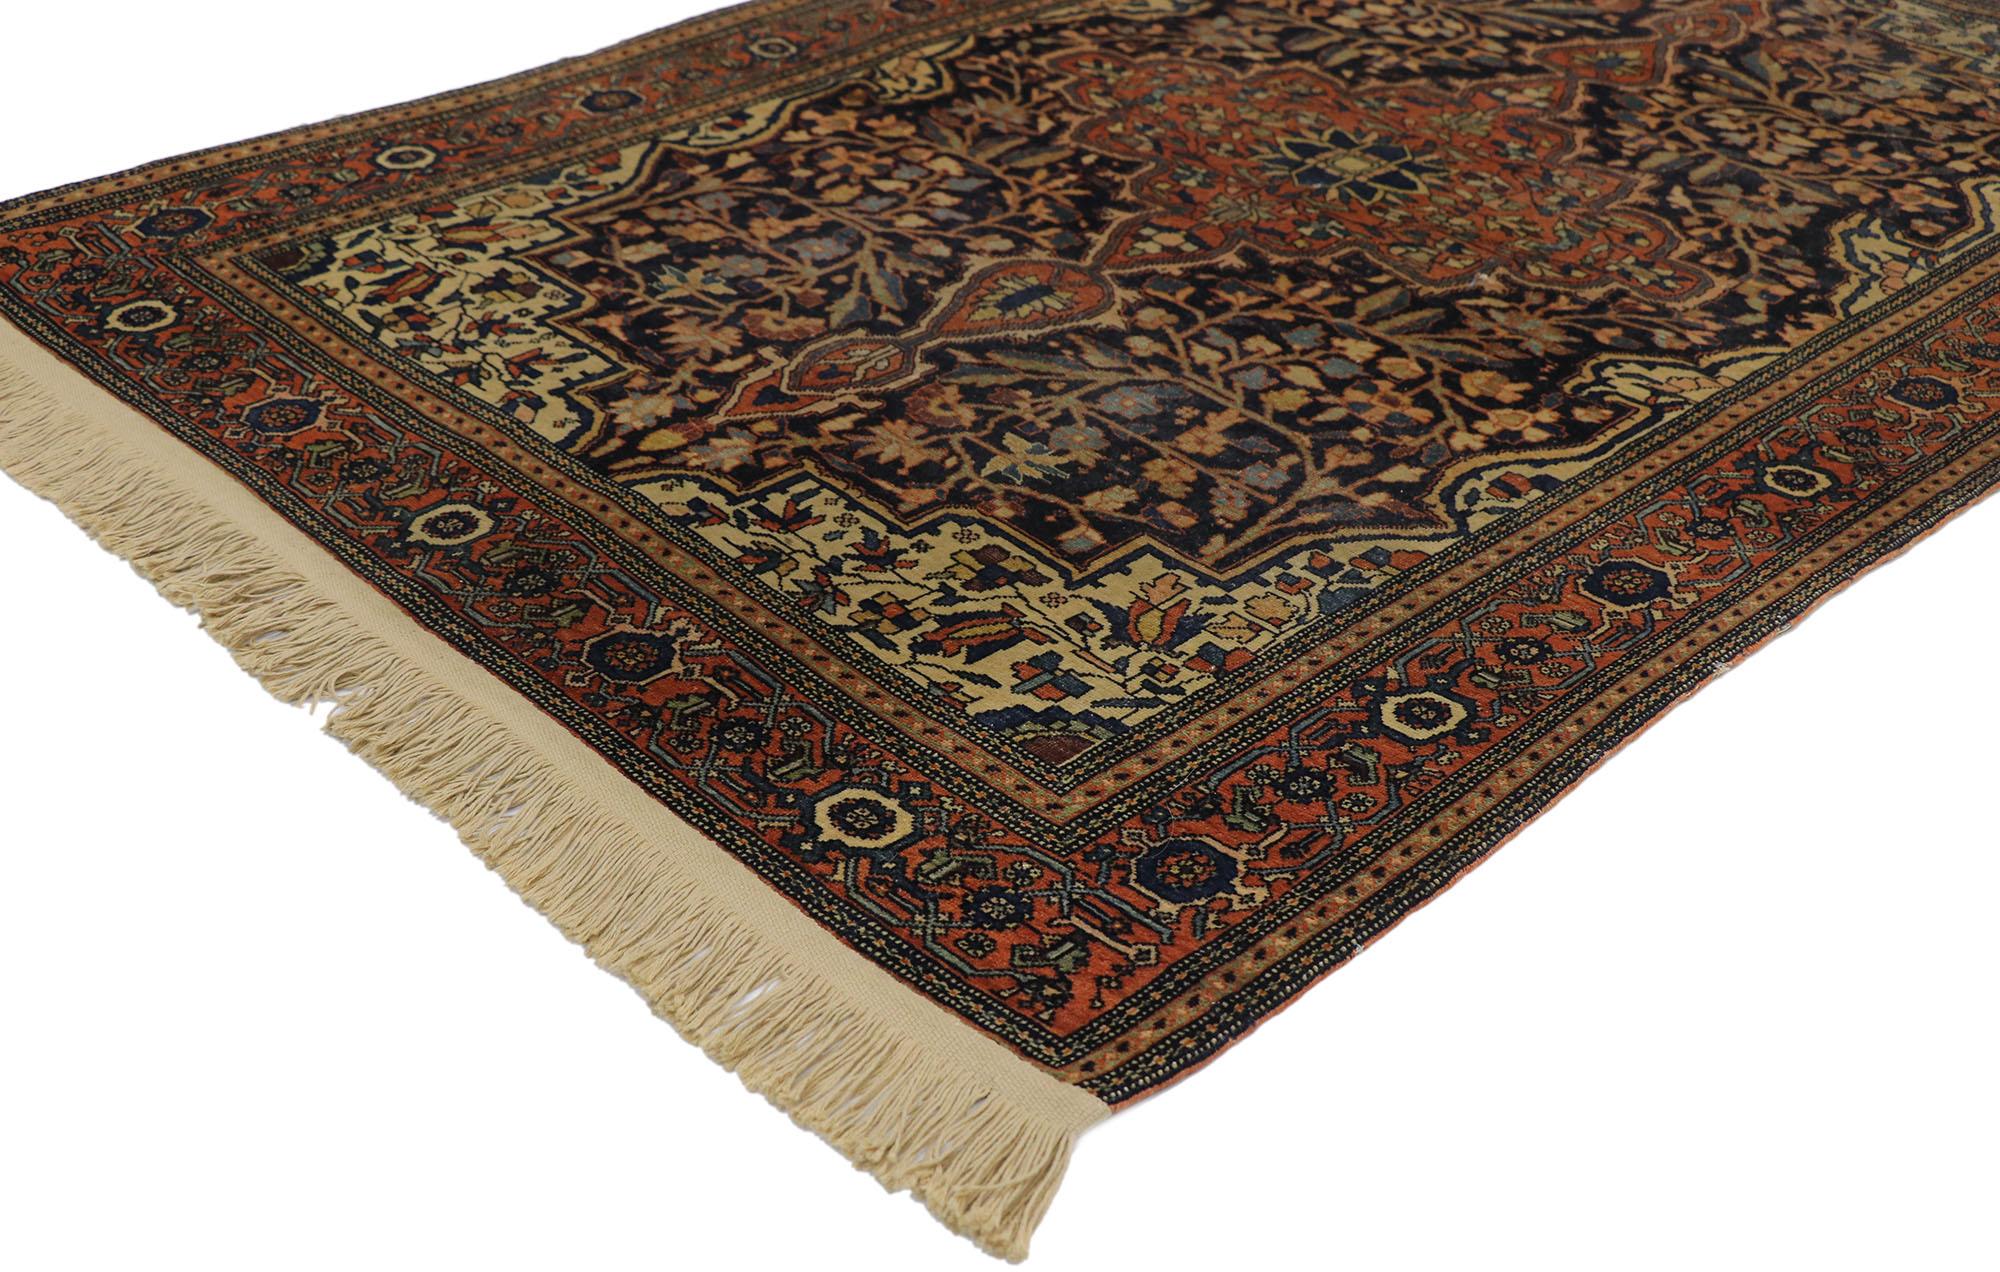 77619 antique Persian Farahan rug with Arts & Crafts style. With a timeless botanical pattern and naturalistic design elements, this hand knotted wool antique Persian Sarouk Farahan rug will take on a curated lived-in look that feels timeless while